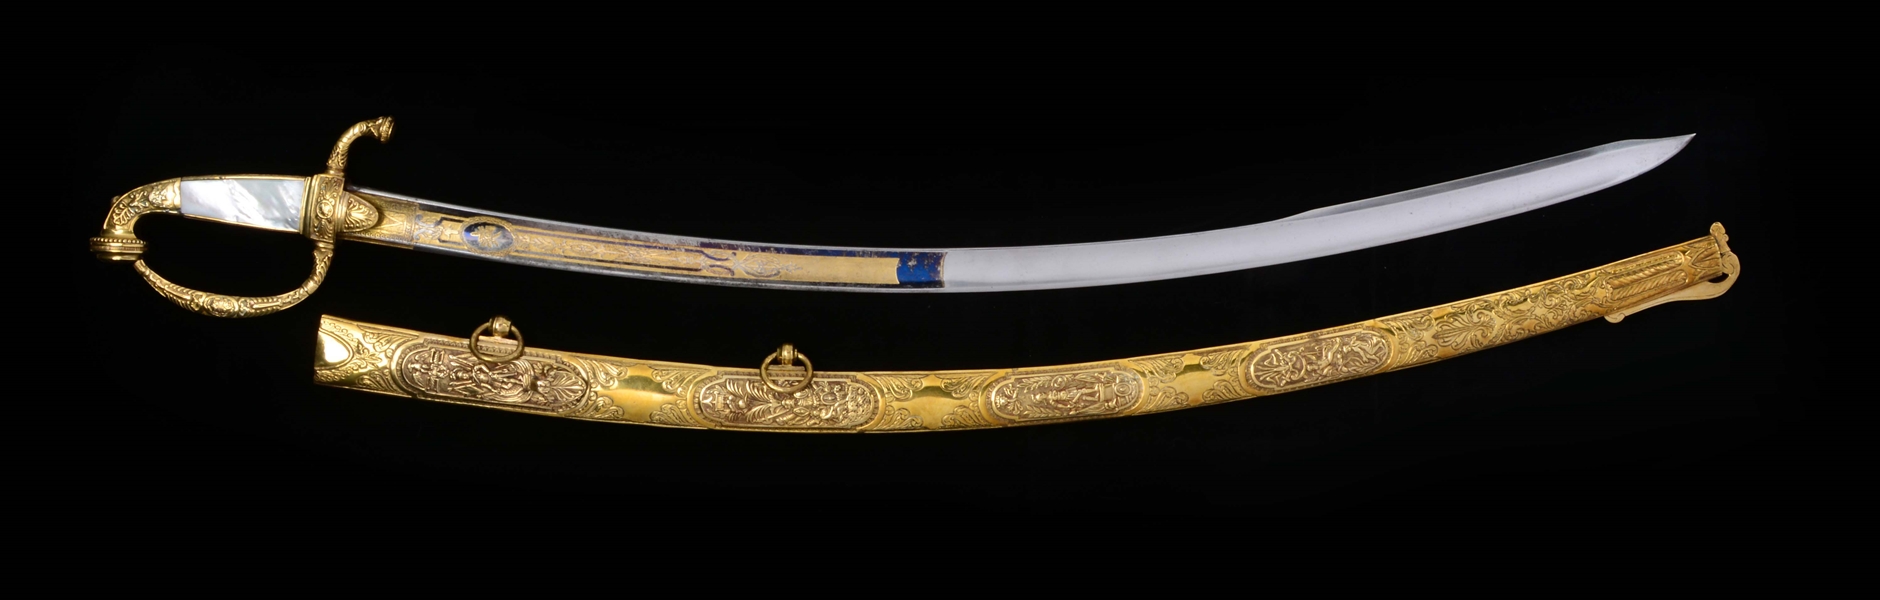 HISTORIC AND ATTRACTIVE FRENCH SABER ATTRIBUTED TO GENERAL BROOKS AND PRESENTED BY LAFAYETTE.